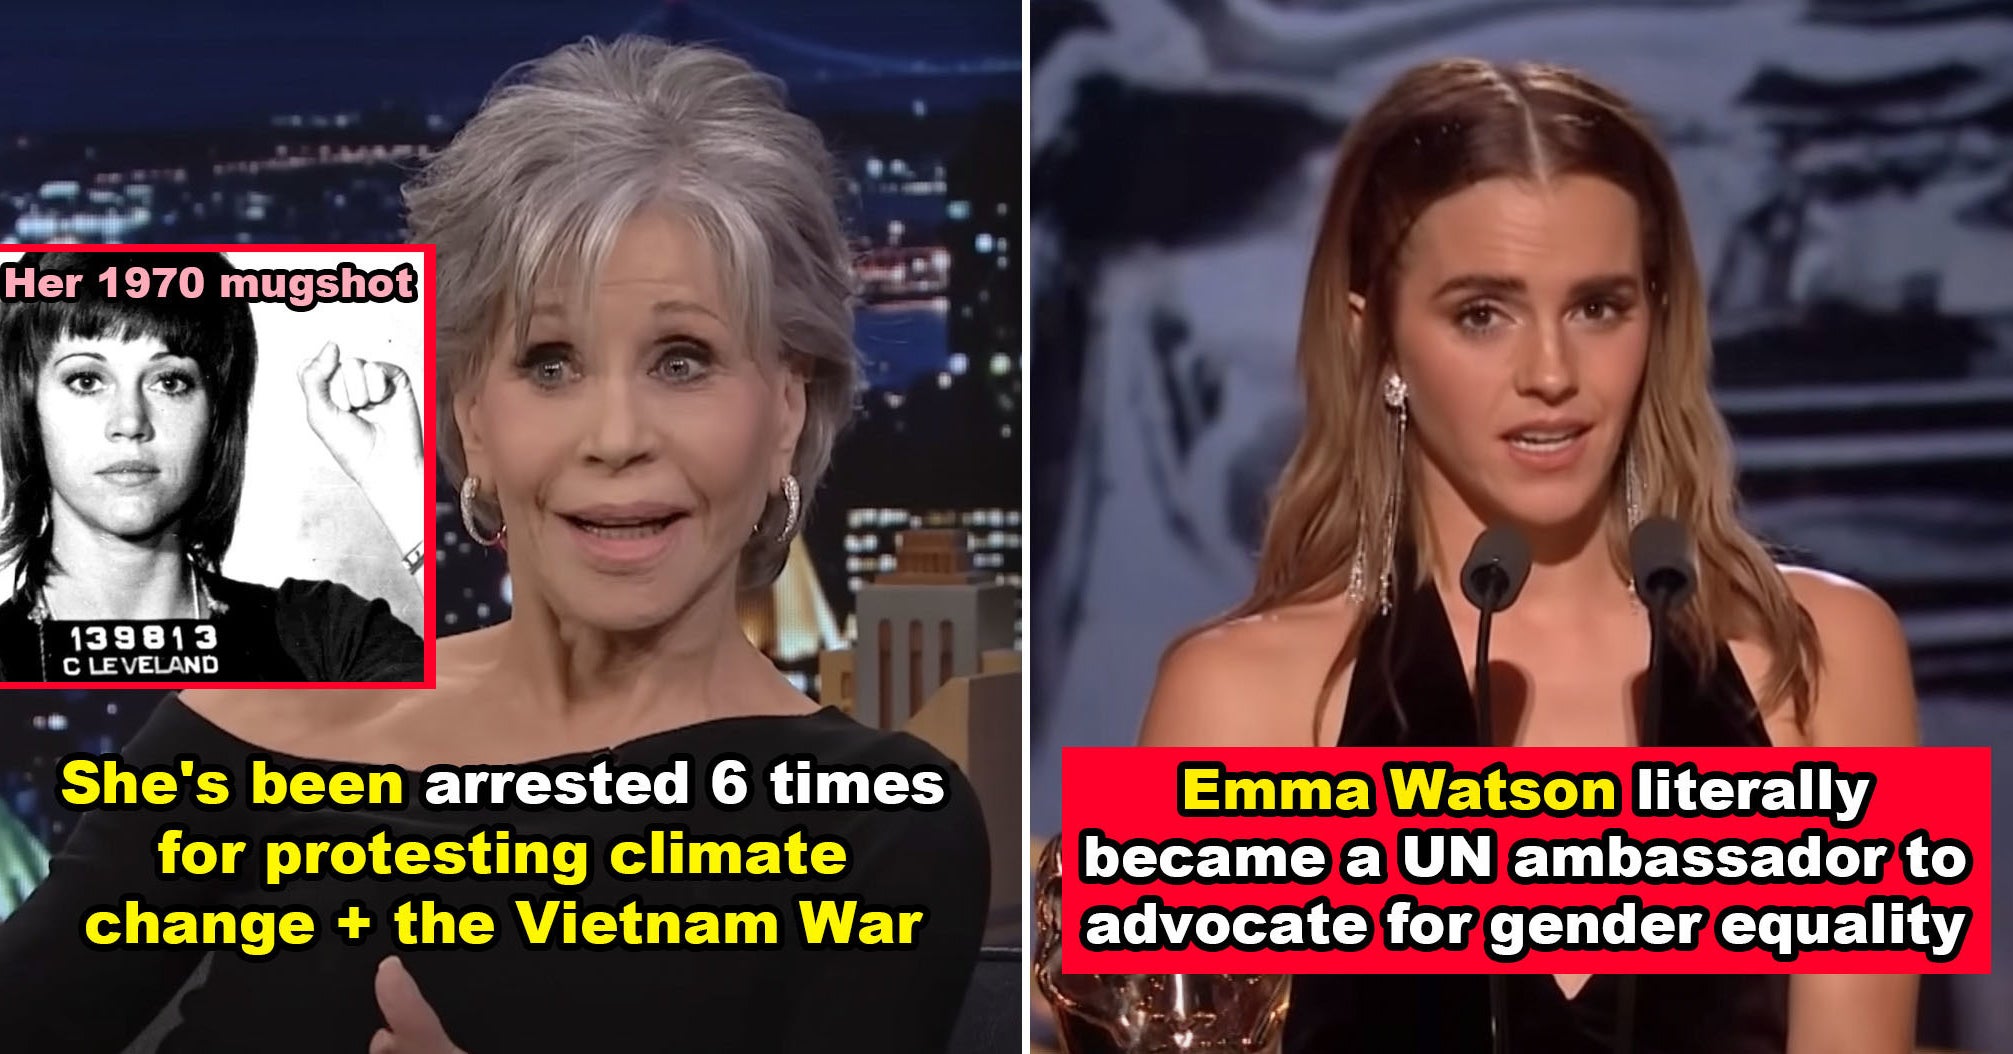 20 Celebrity Activists Who Have Stood Up To Injustice